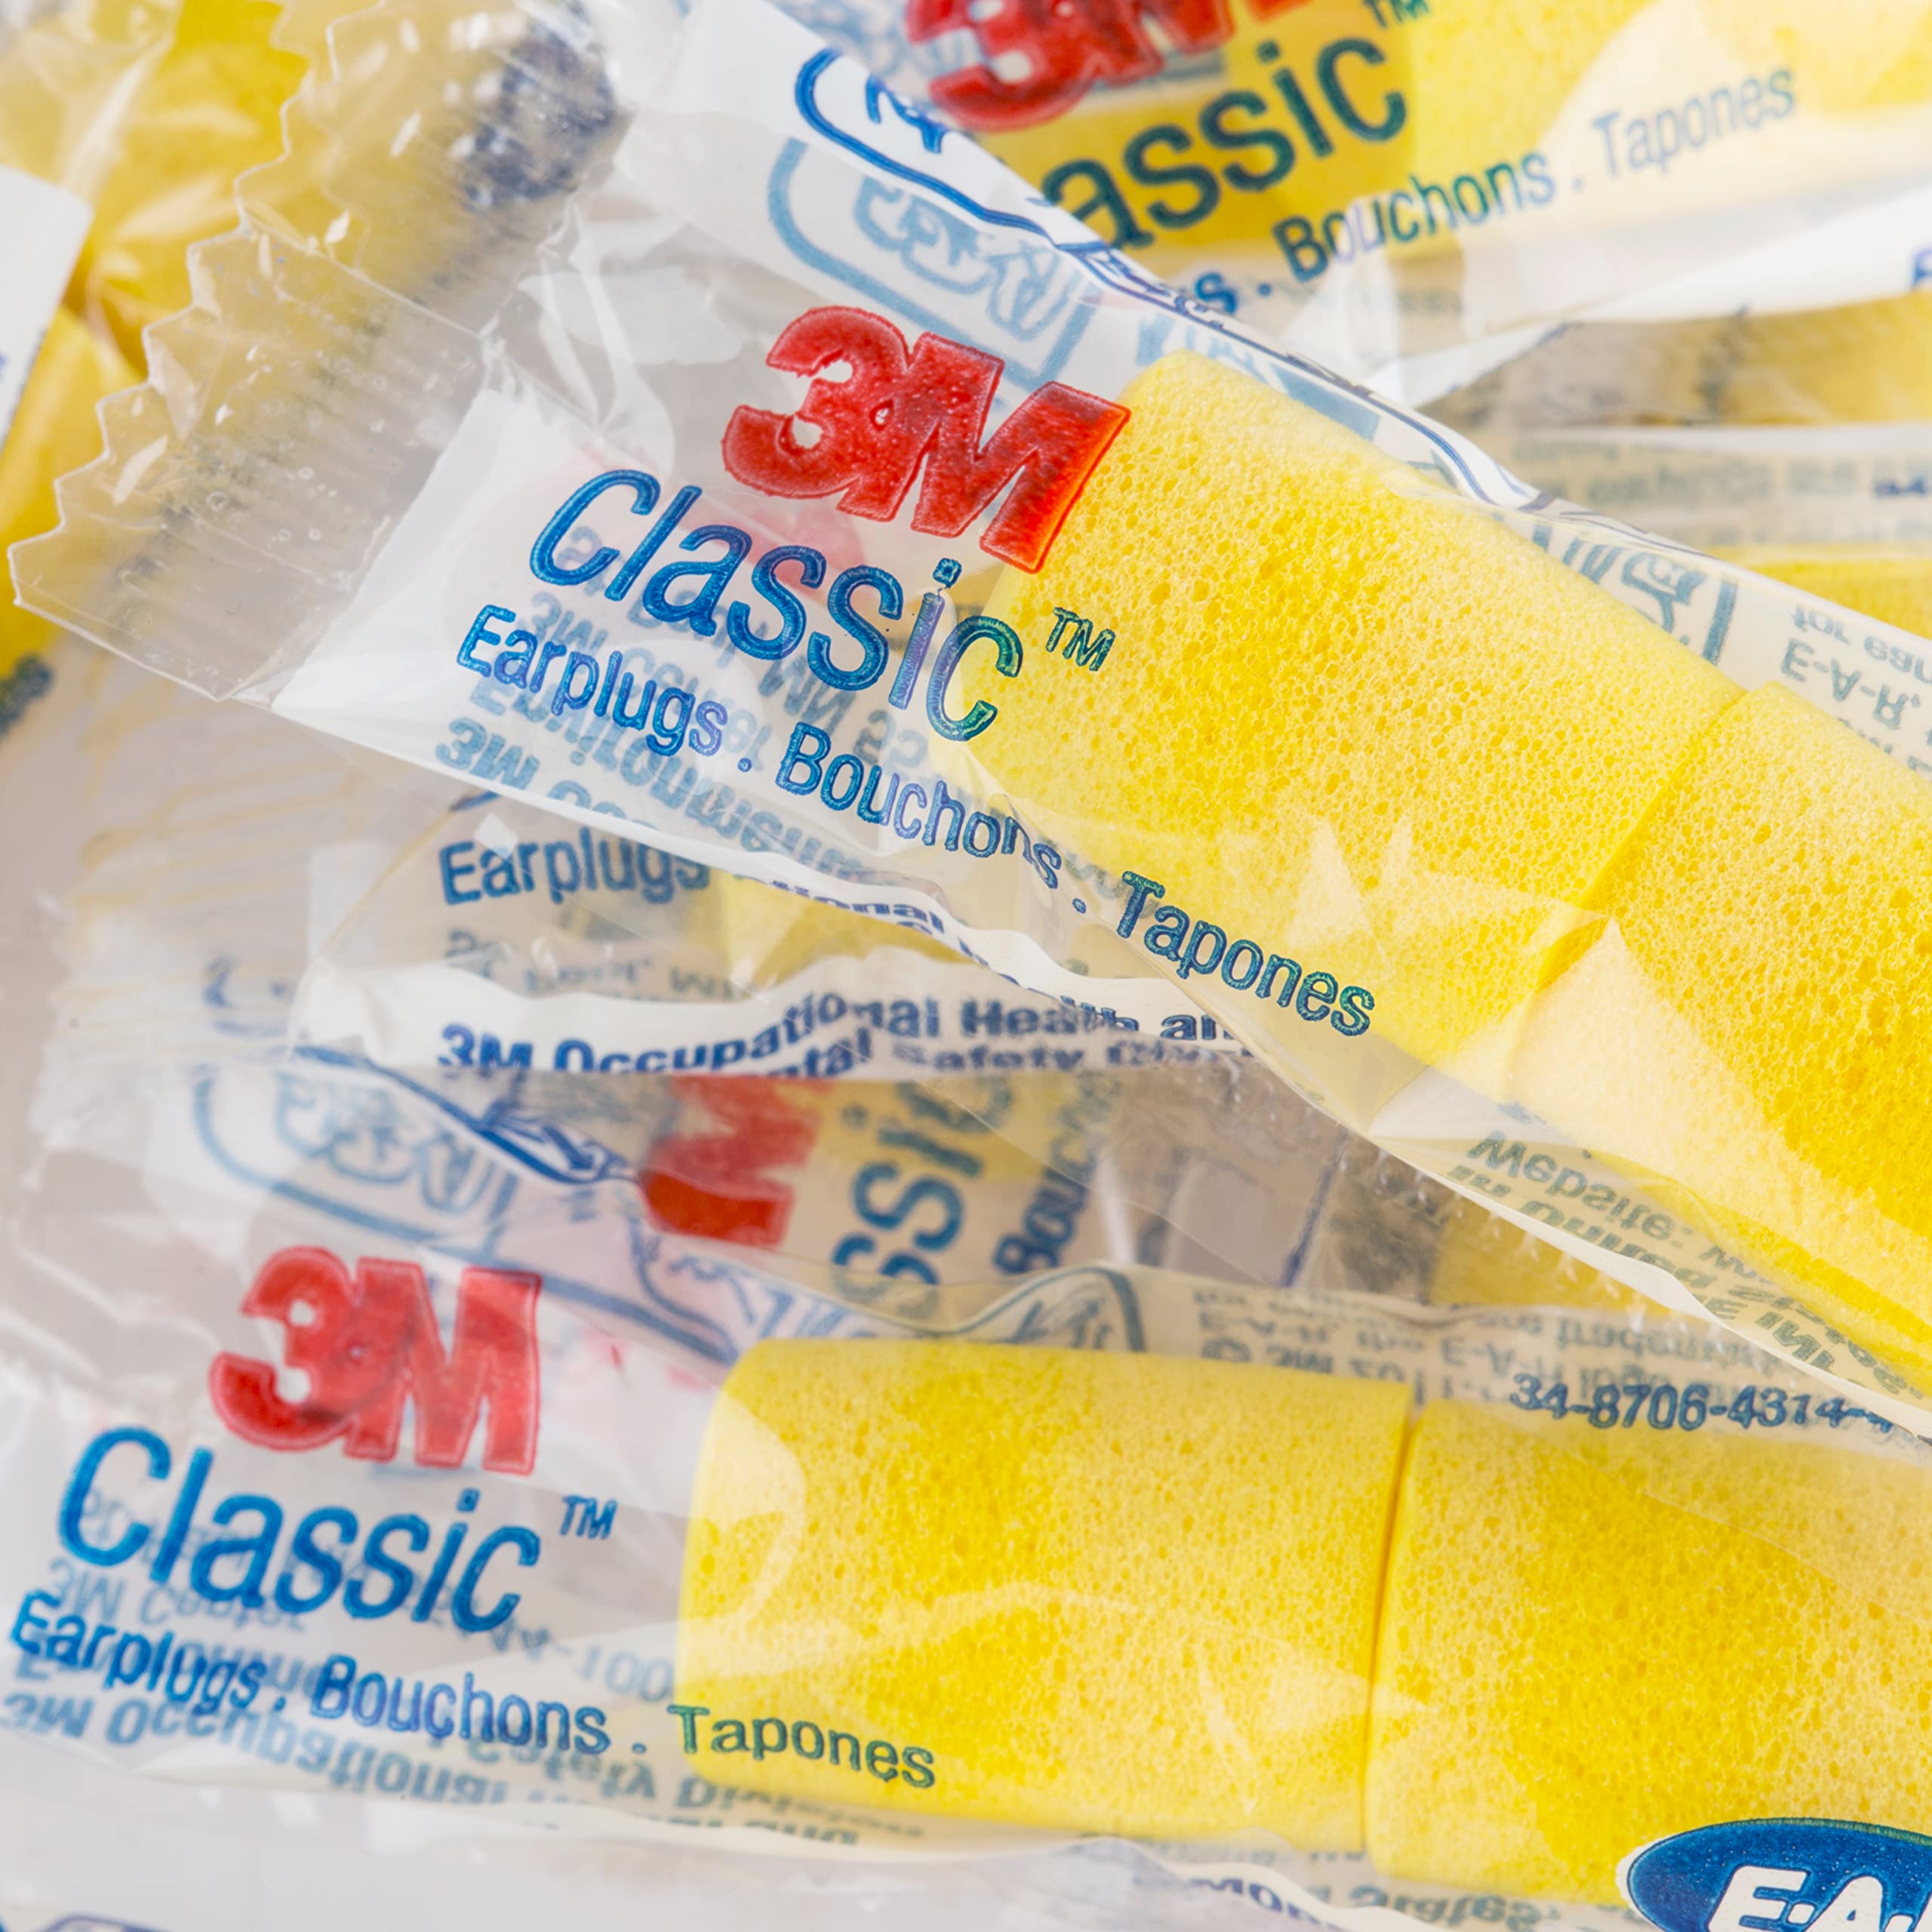 3M Ear Plugs, 200 Pairs/Box, E-A-R Classic 312-1201, Uncorded, Disposable, Foam, NRR 29, For Drilling, Grinding, Machining, Sawing, Sanding, Welding, 1 Pair/Poly Bag Yellow